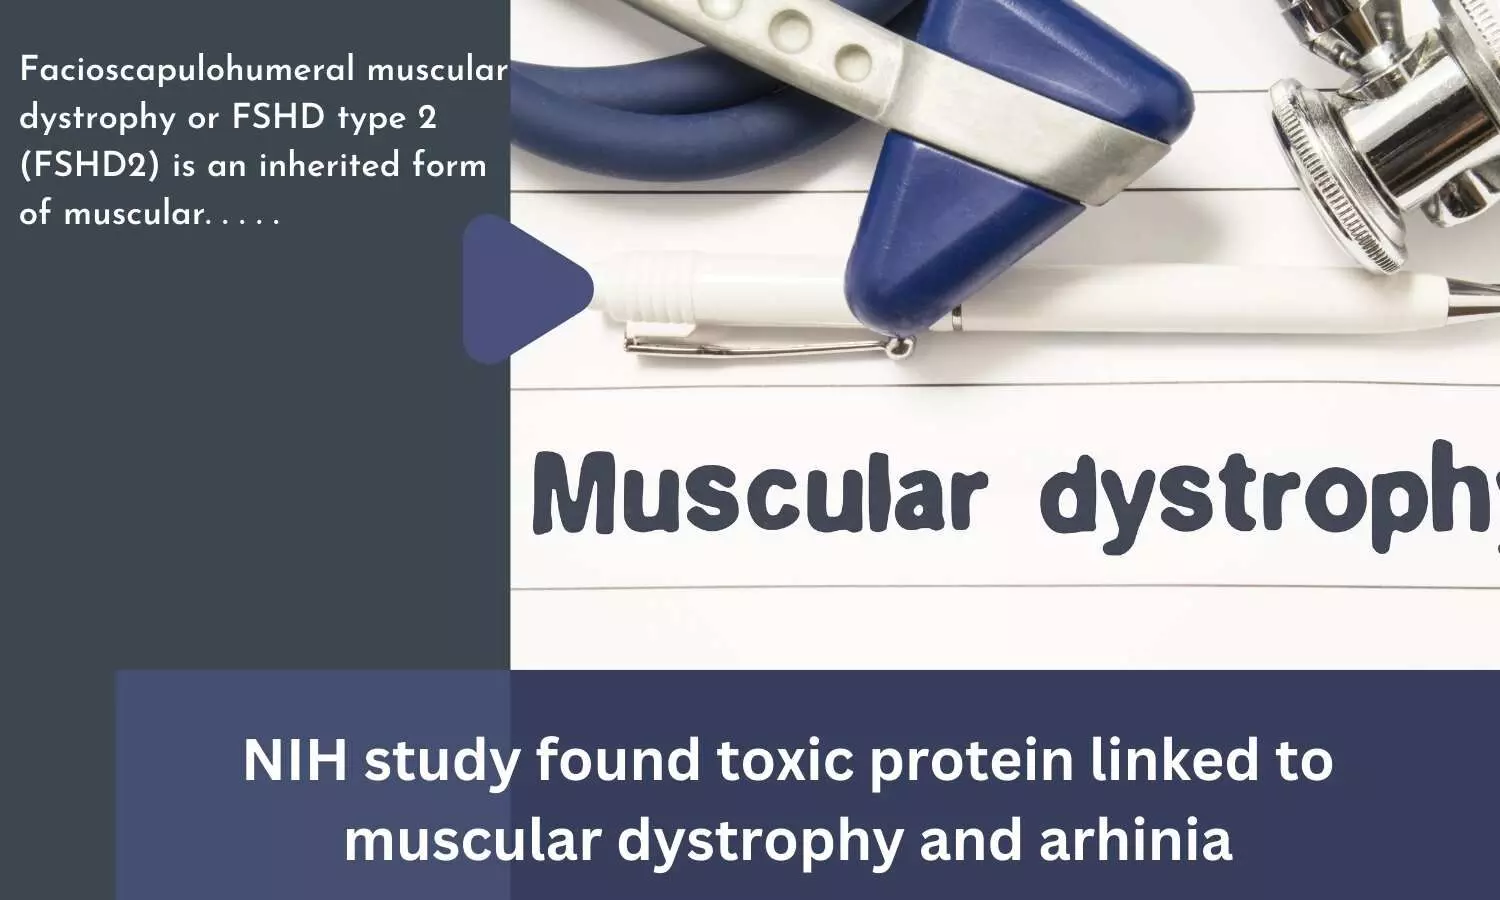 NIH study found toxic protein linked to muscular dystrophy and arhinia